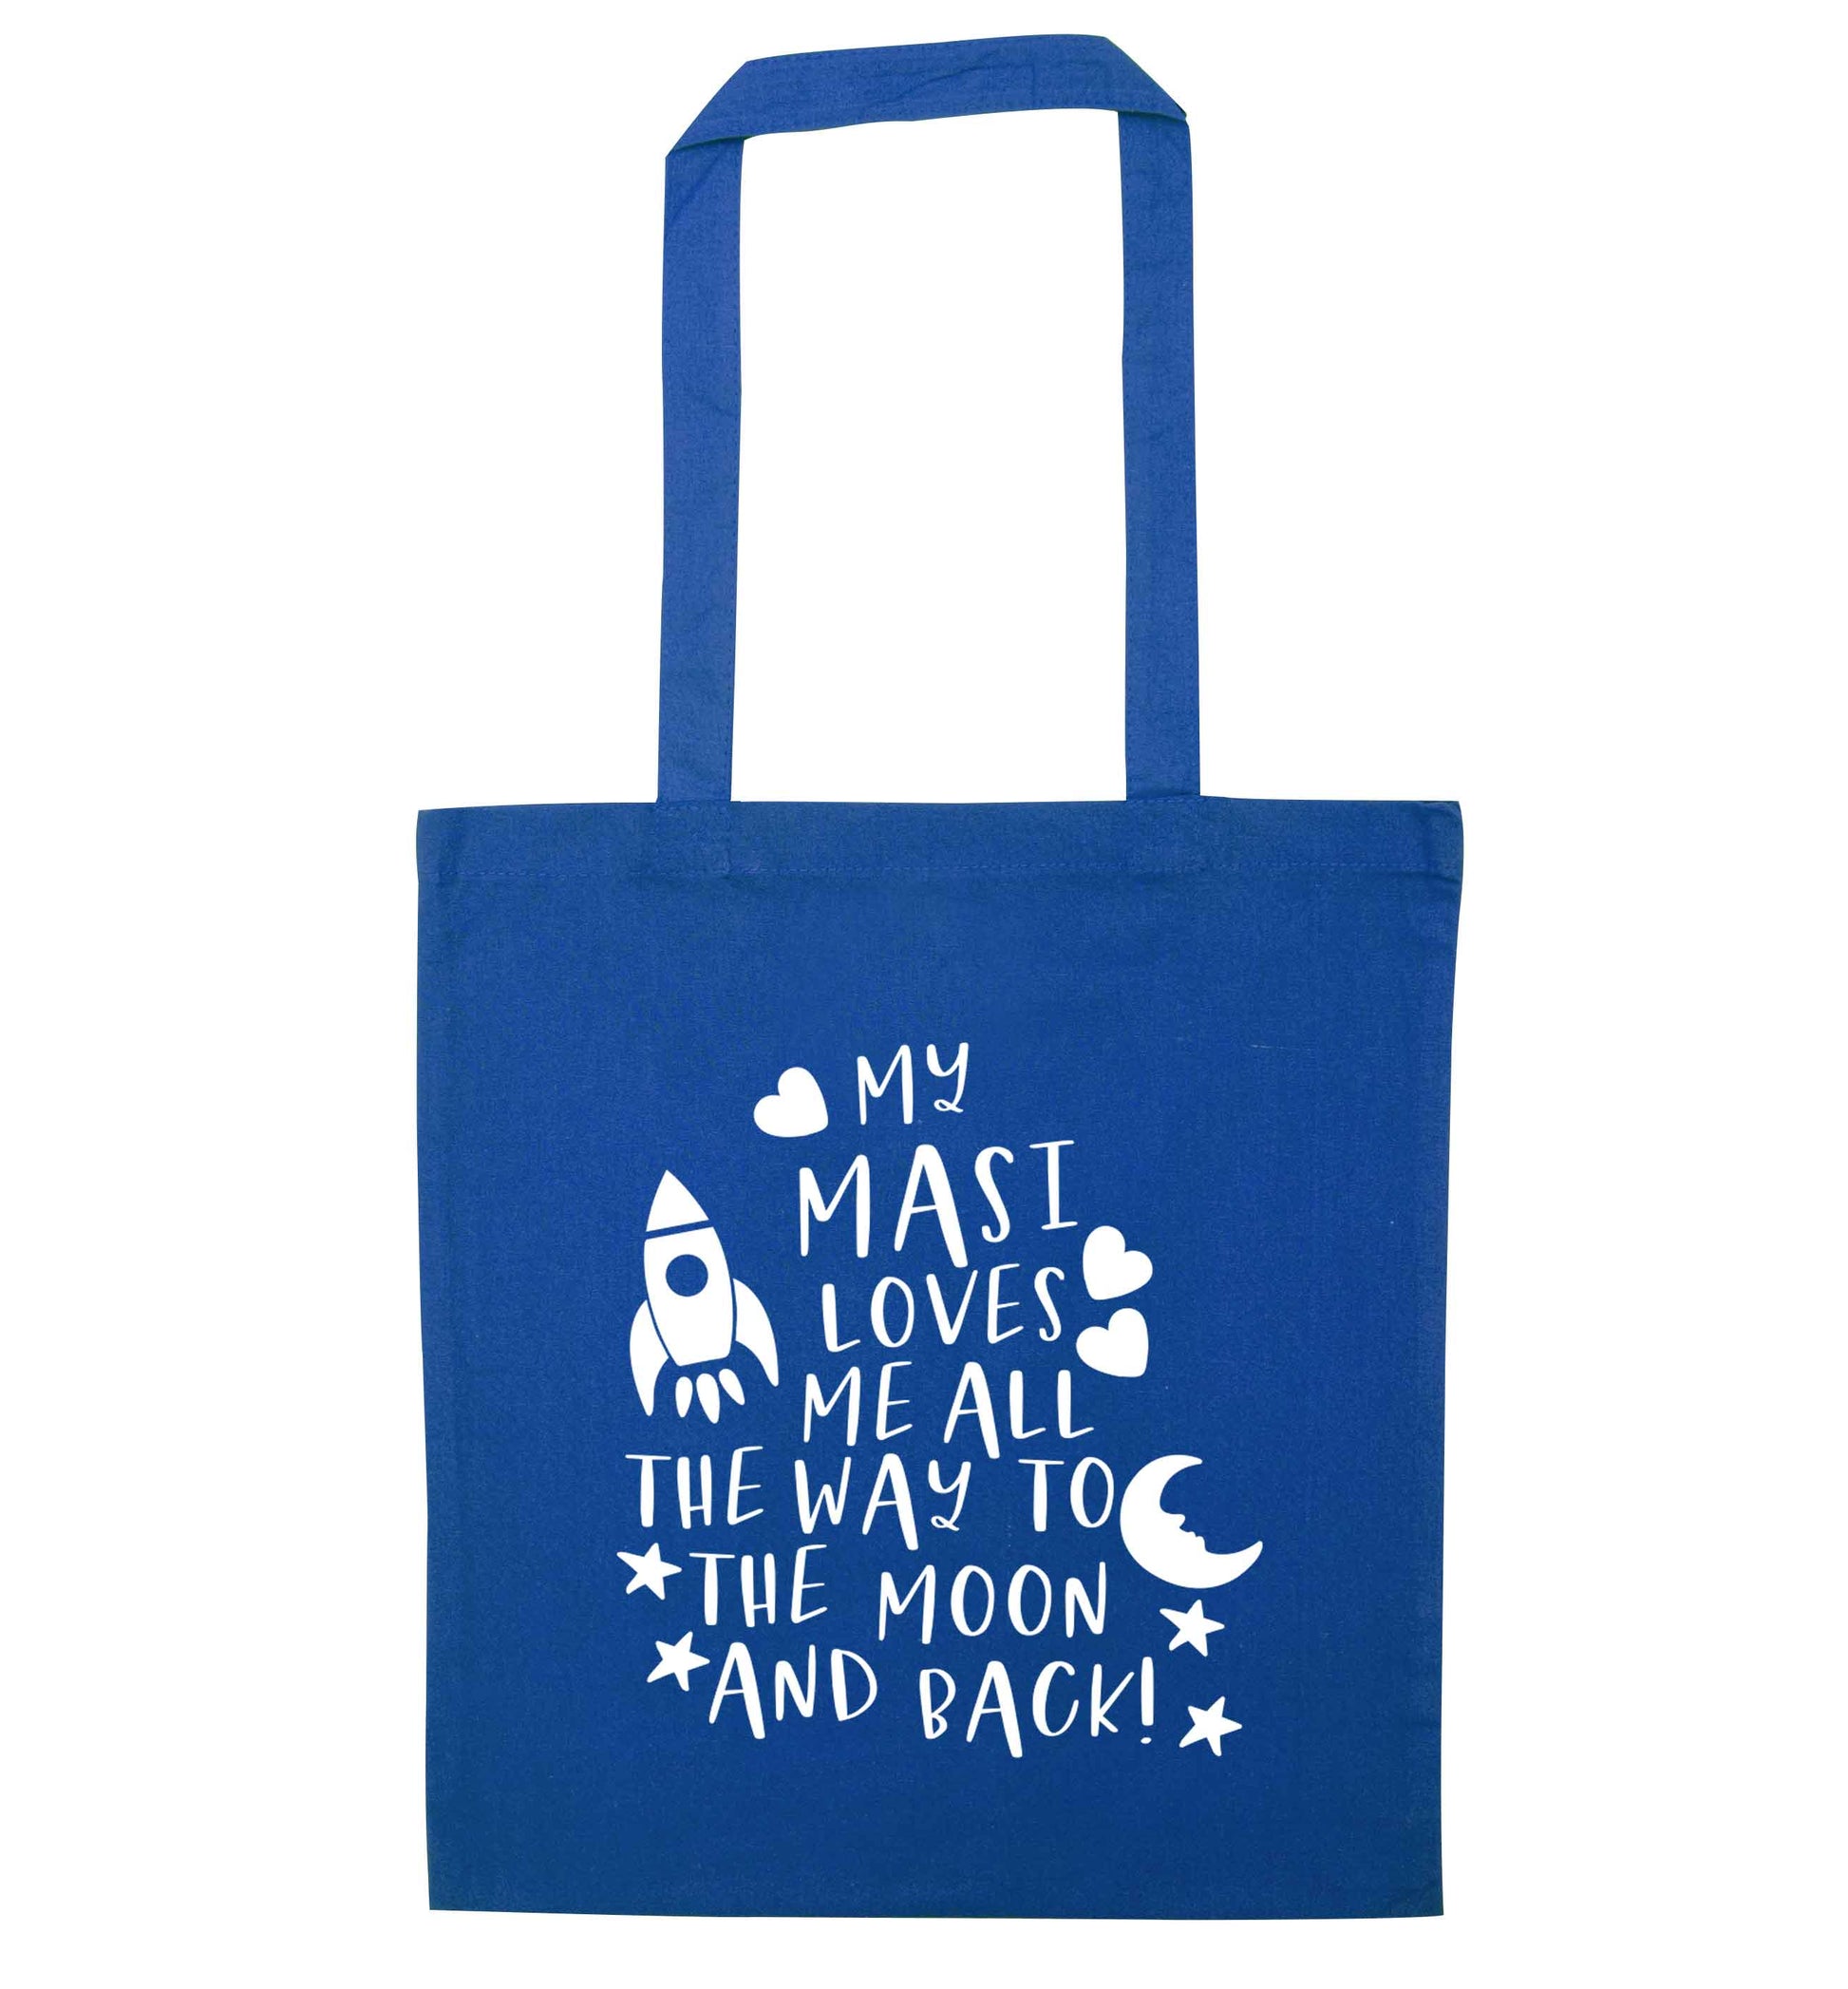 My masi loves me all the way to the moon and back blue tote bag